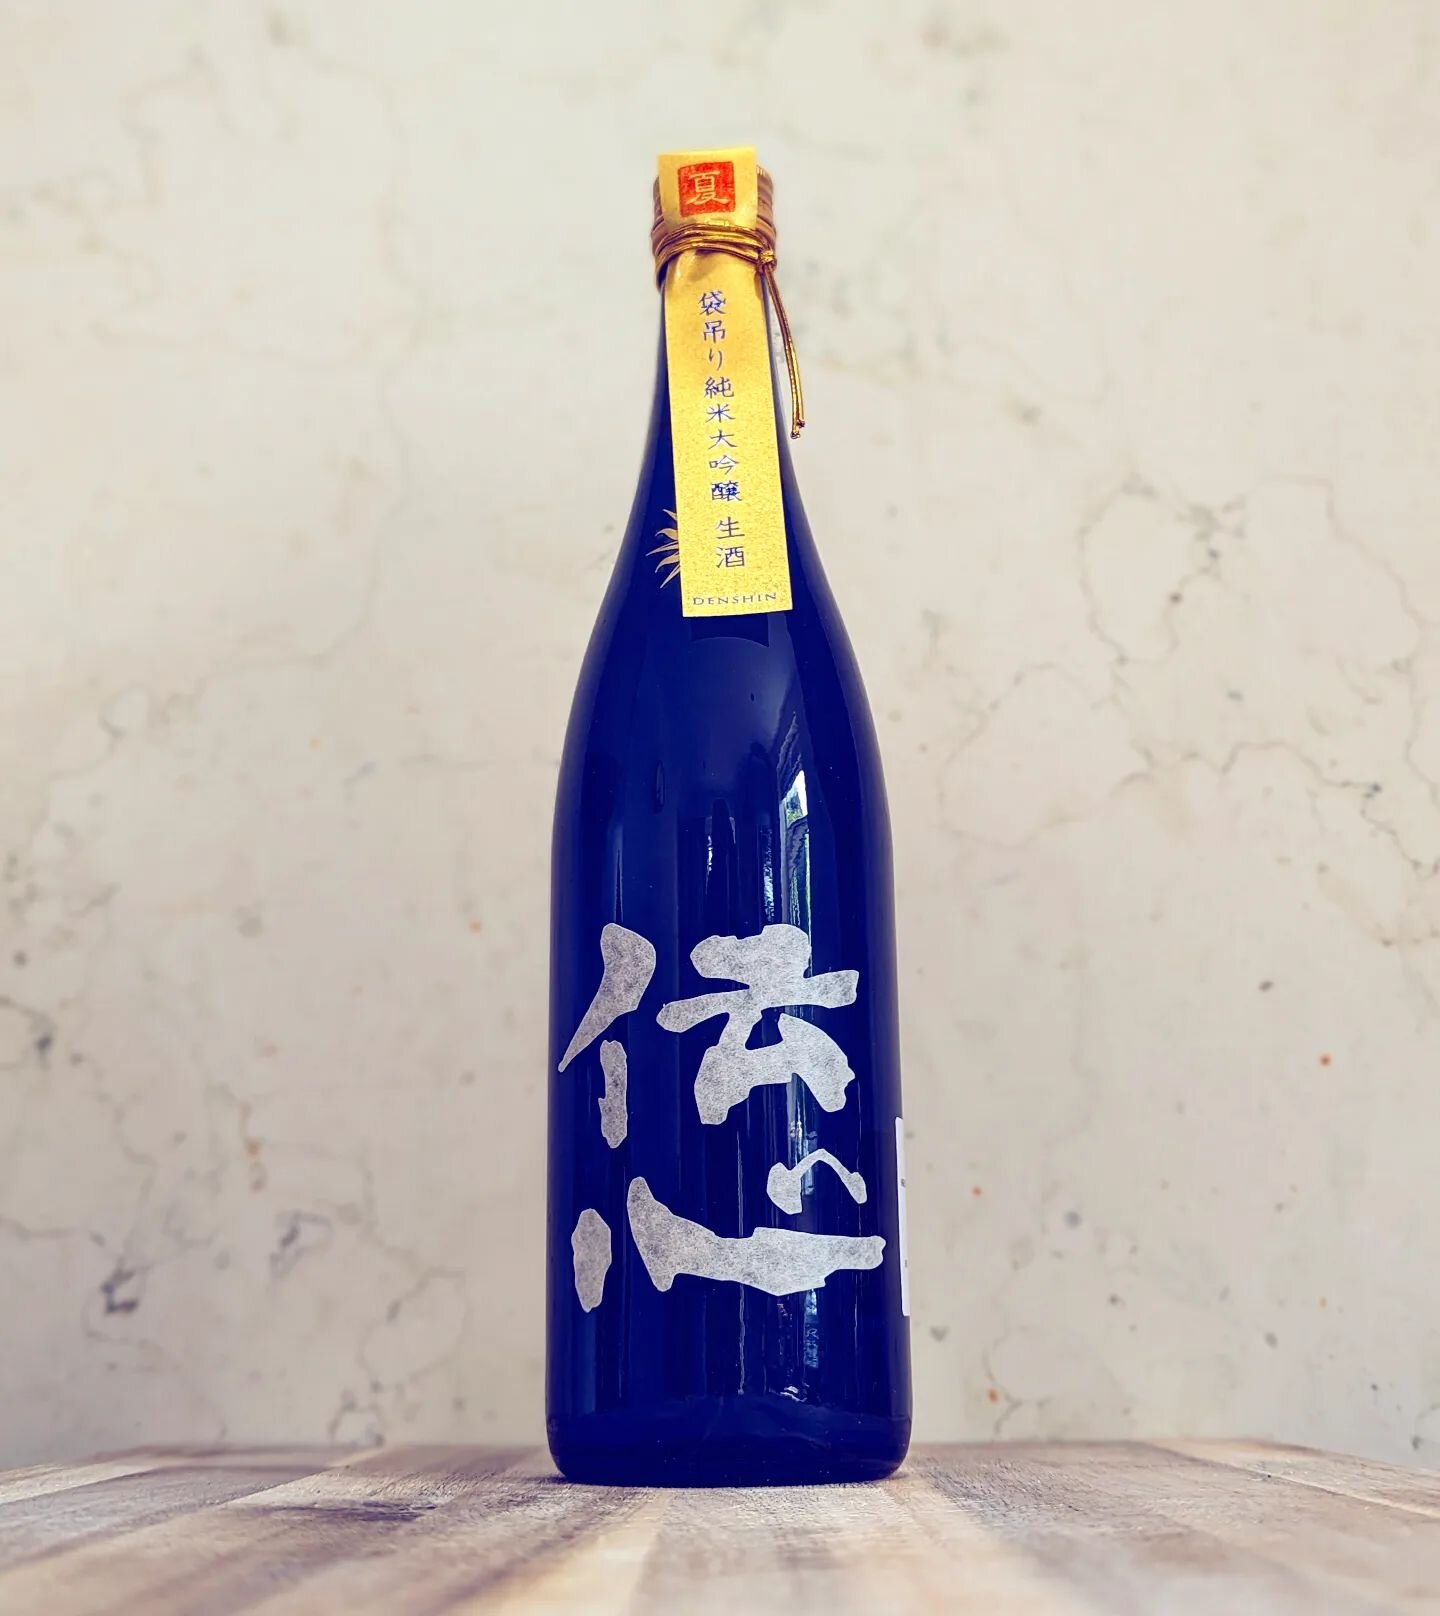 NAMASAKE!
.
Say hello to Denshin Natsu Seasonal Junmai Daiginjo Namasake, from Fukui prefecture 🇯🇵
.

In 3 words: Floral fruity Summertime
.
This gorgeous, peachy nama (unpasteurised) sake pops up for just a limited time during the Summer. The brew